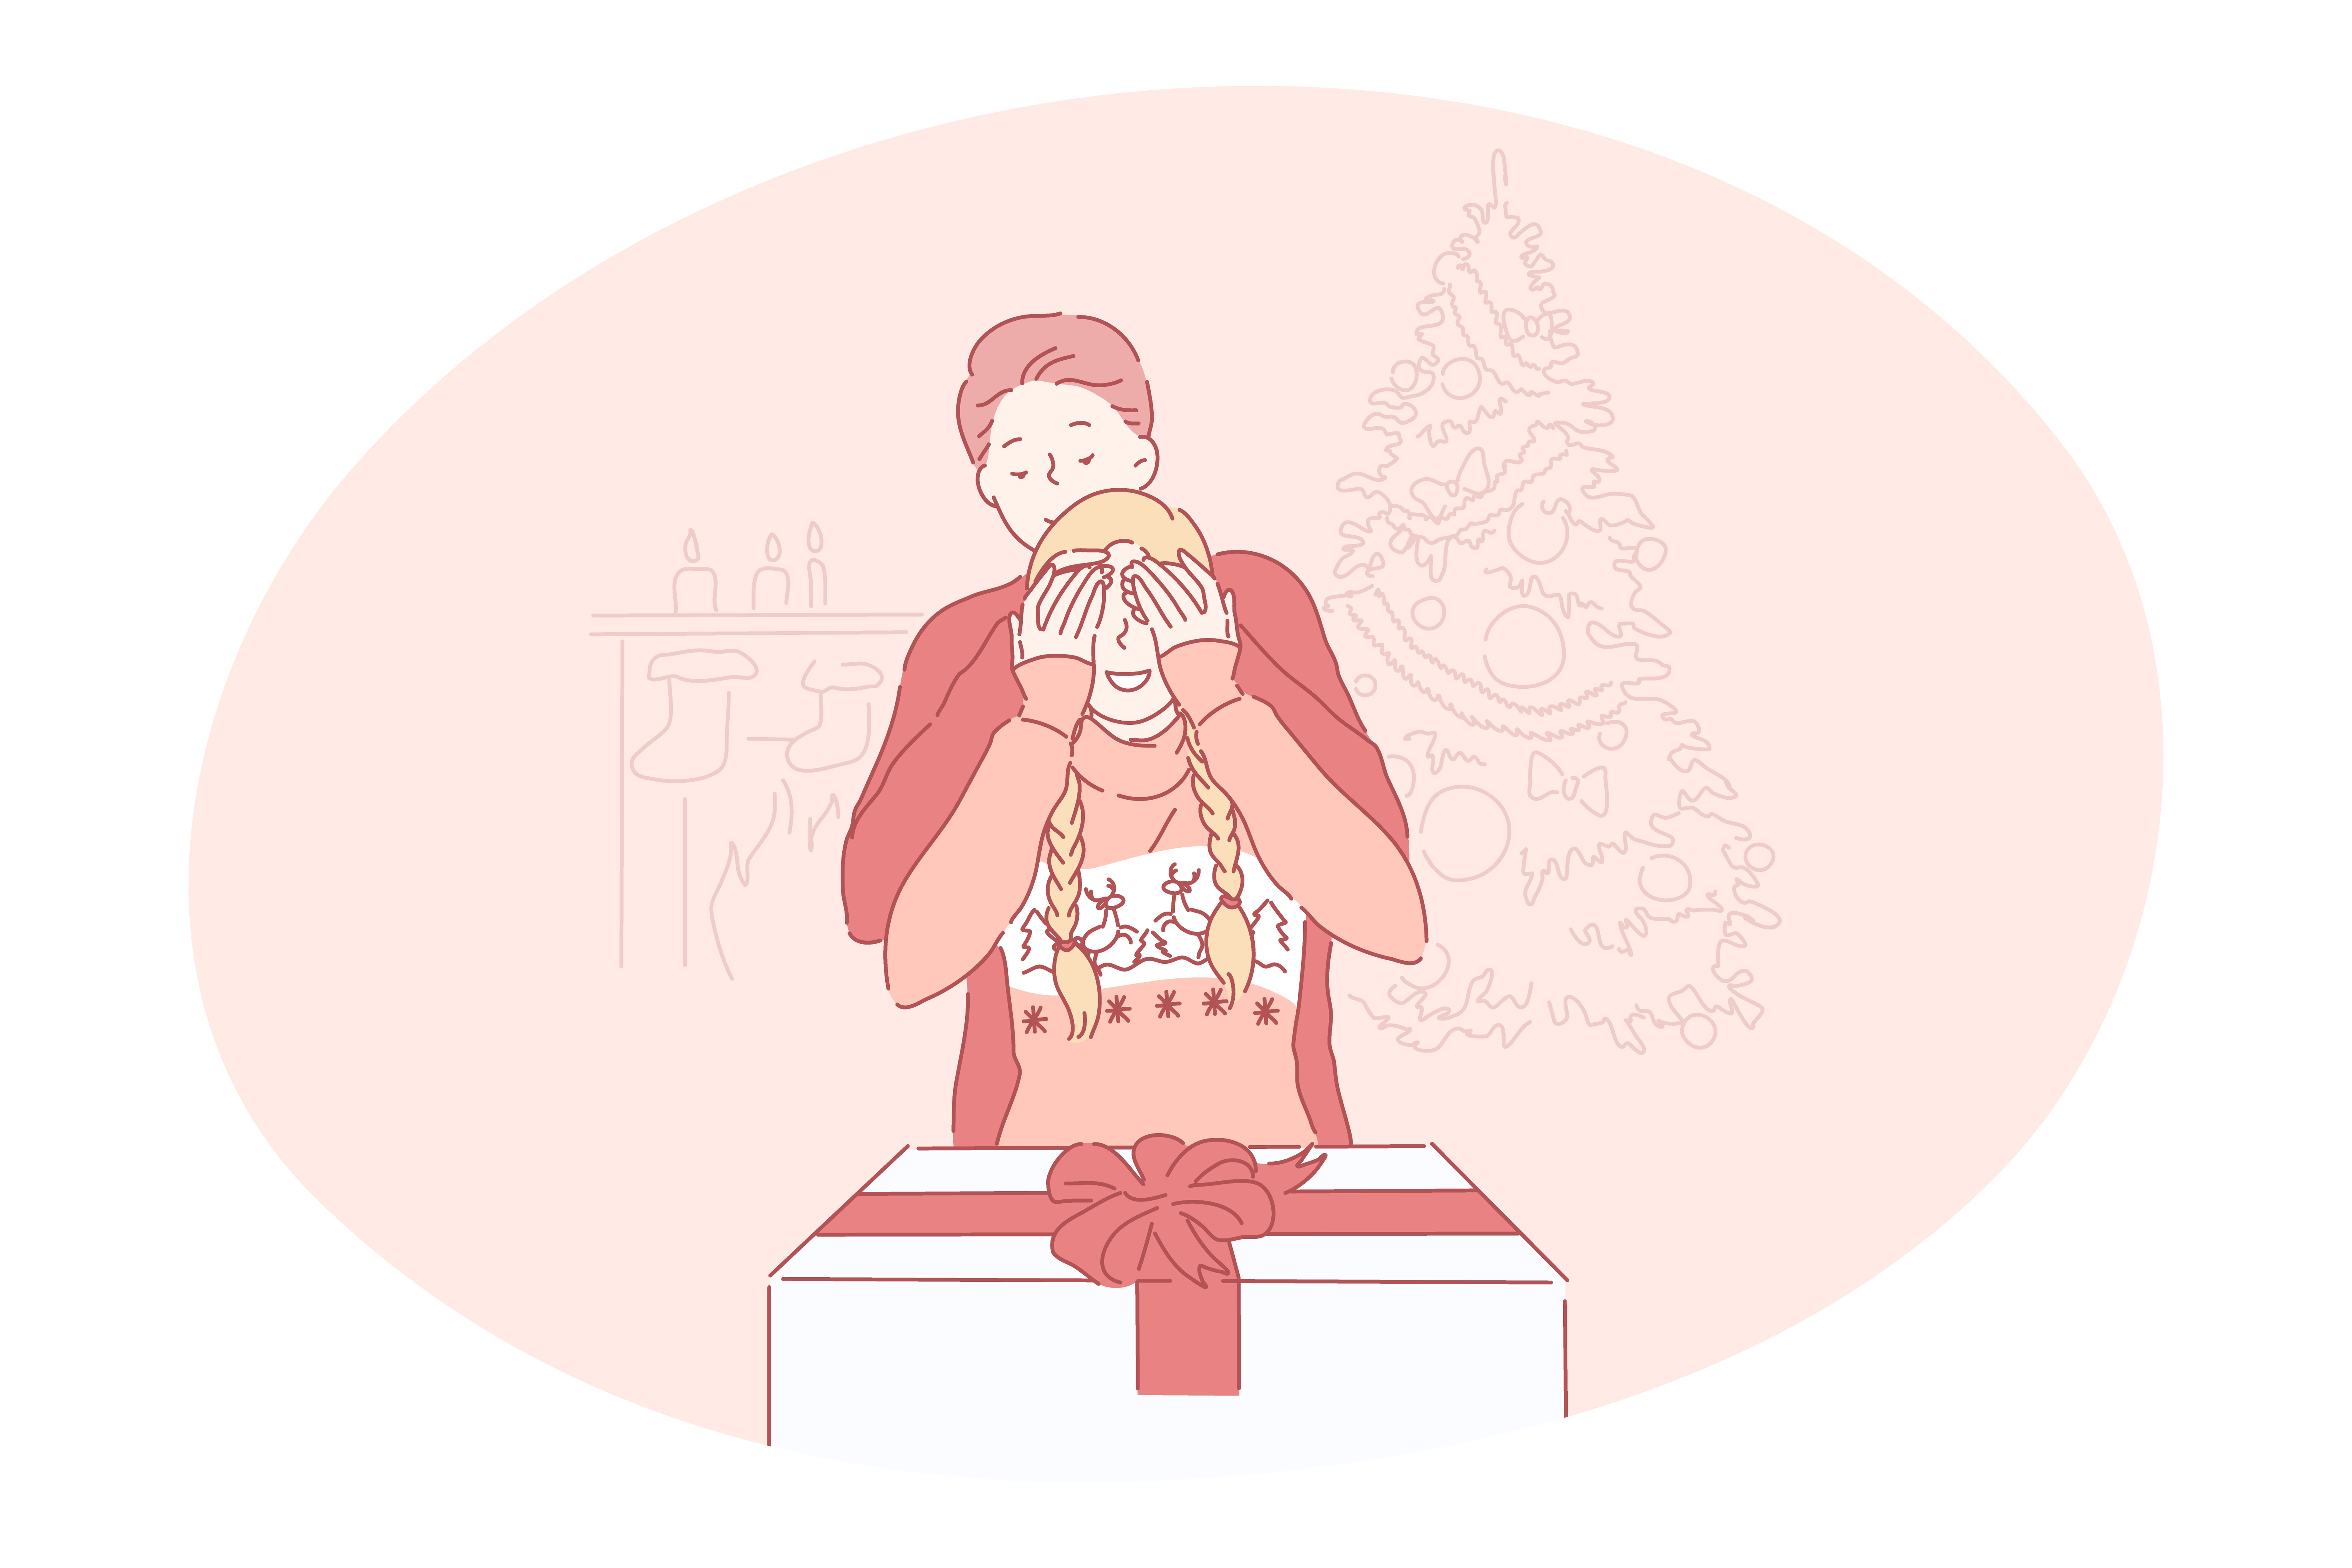 Christmas present, gift, celebration of New Year and winter holidays concept. Smiling boyfriend cartoon character covering girlfriends eyes before showing holiday Christmas present box with ribbon. Christmas present, gift, celebration of New Year and winter holidays concept